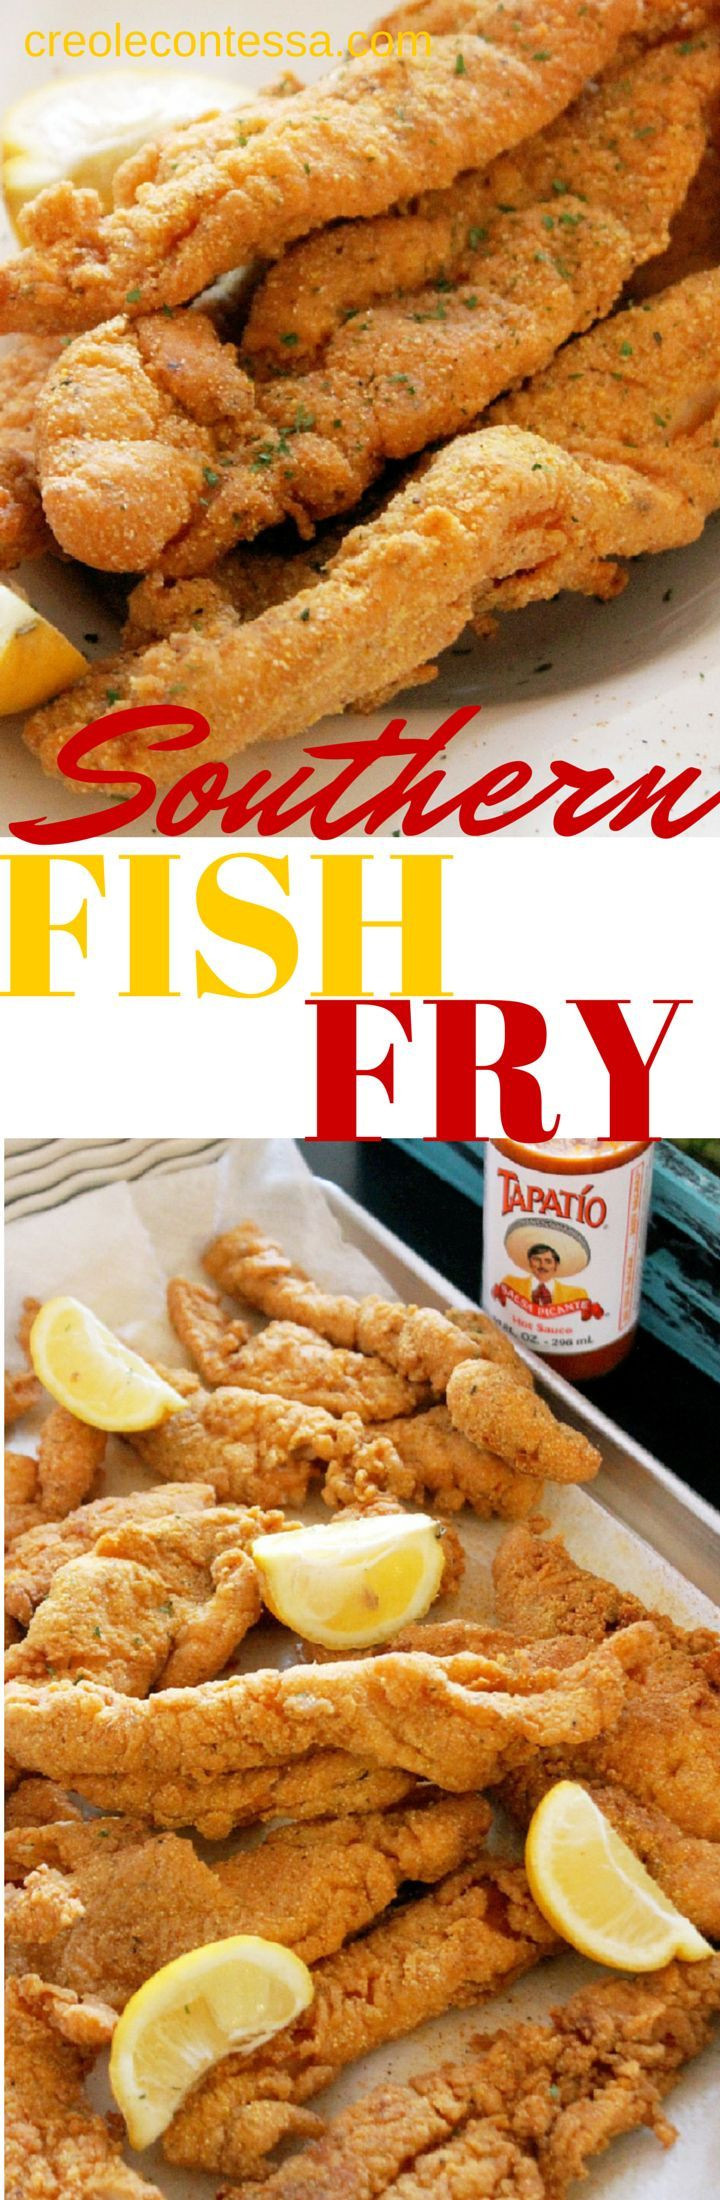 Good Side Dishes To Serve With A Fish Fry
 Southern Fish Fry Pin now try later